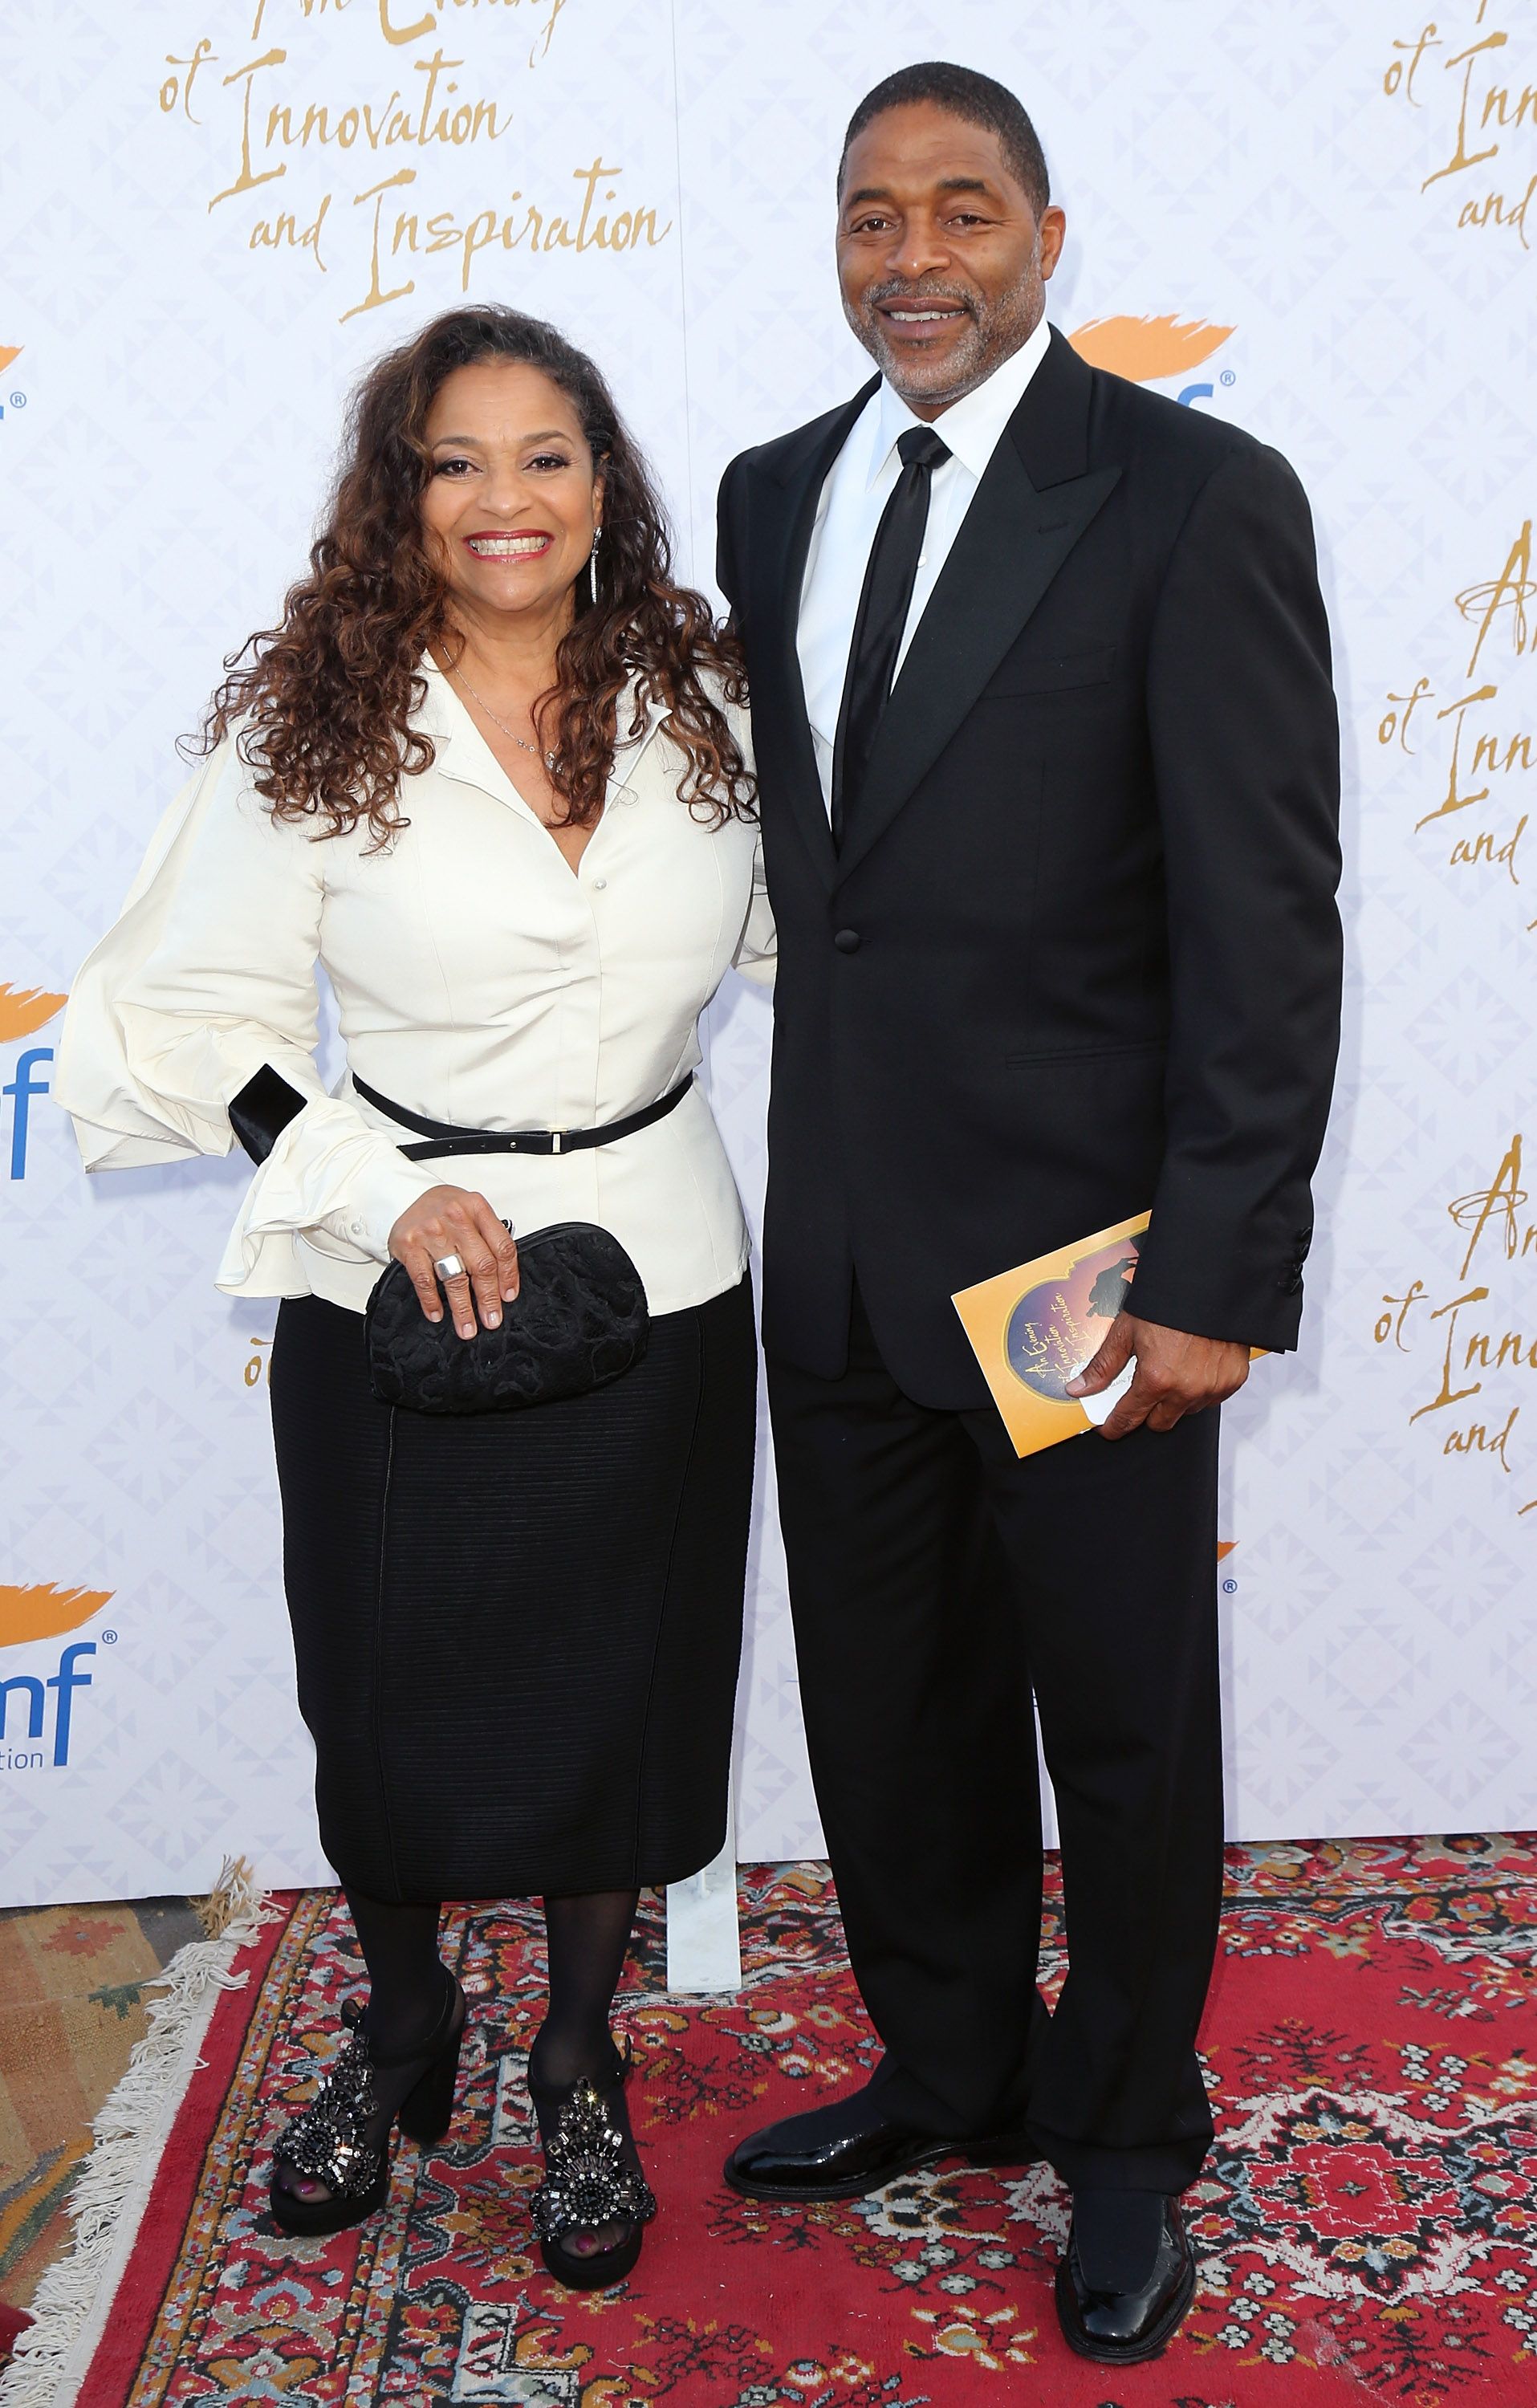 Debbie Allen and Norm Nixon attend the 10th Annual Alfred Mann Foundation Gala in the Robinsons-May Lot on October 13, 2013 in Beverly Hills, California. | Source: Getty Images